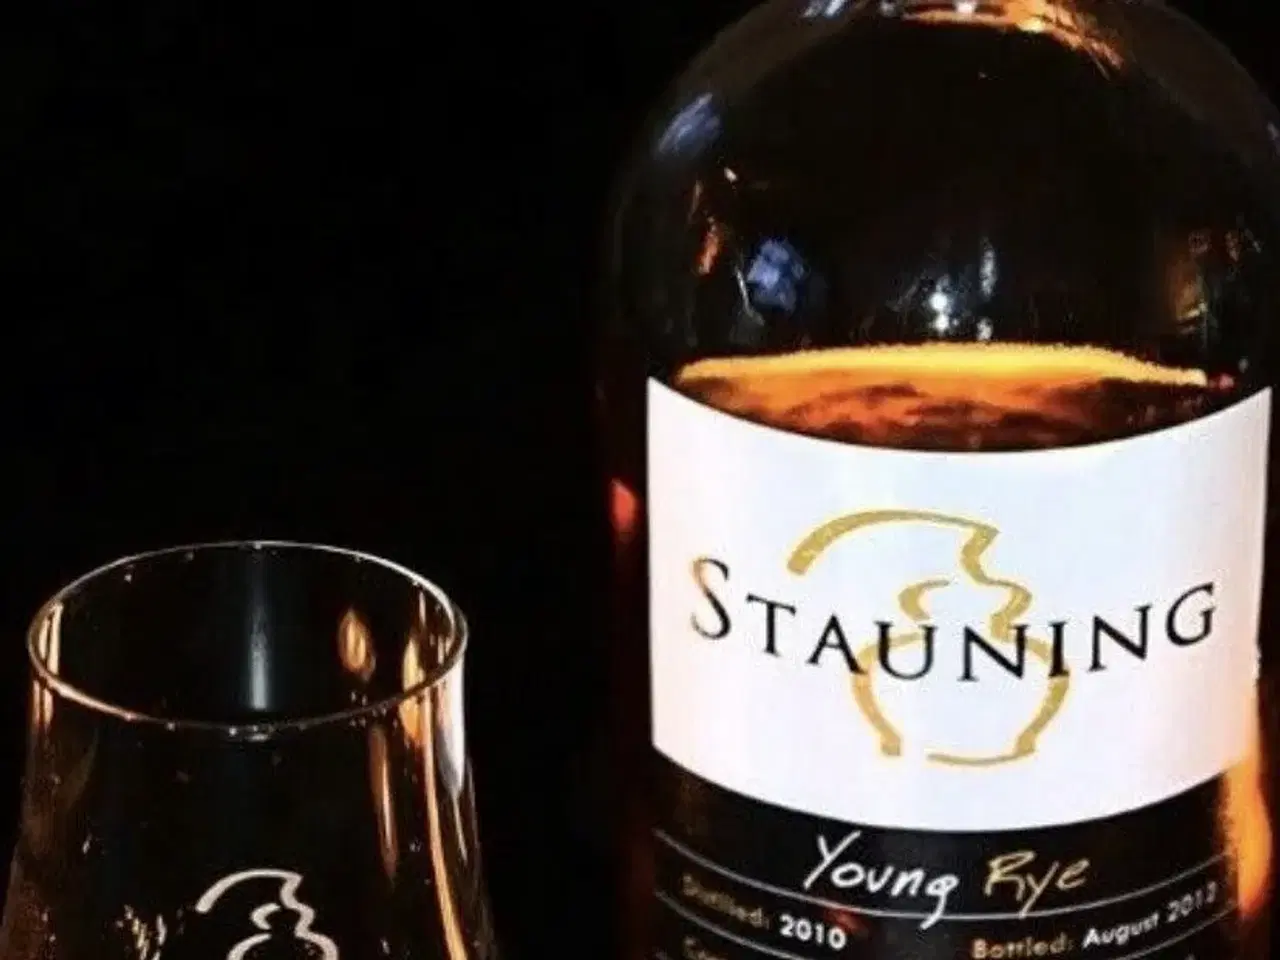 Billede 1 - Stauning Young Rye 